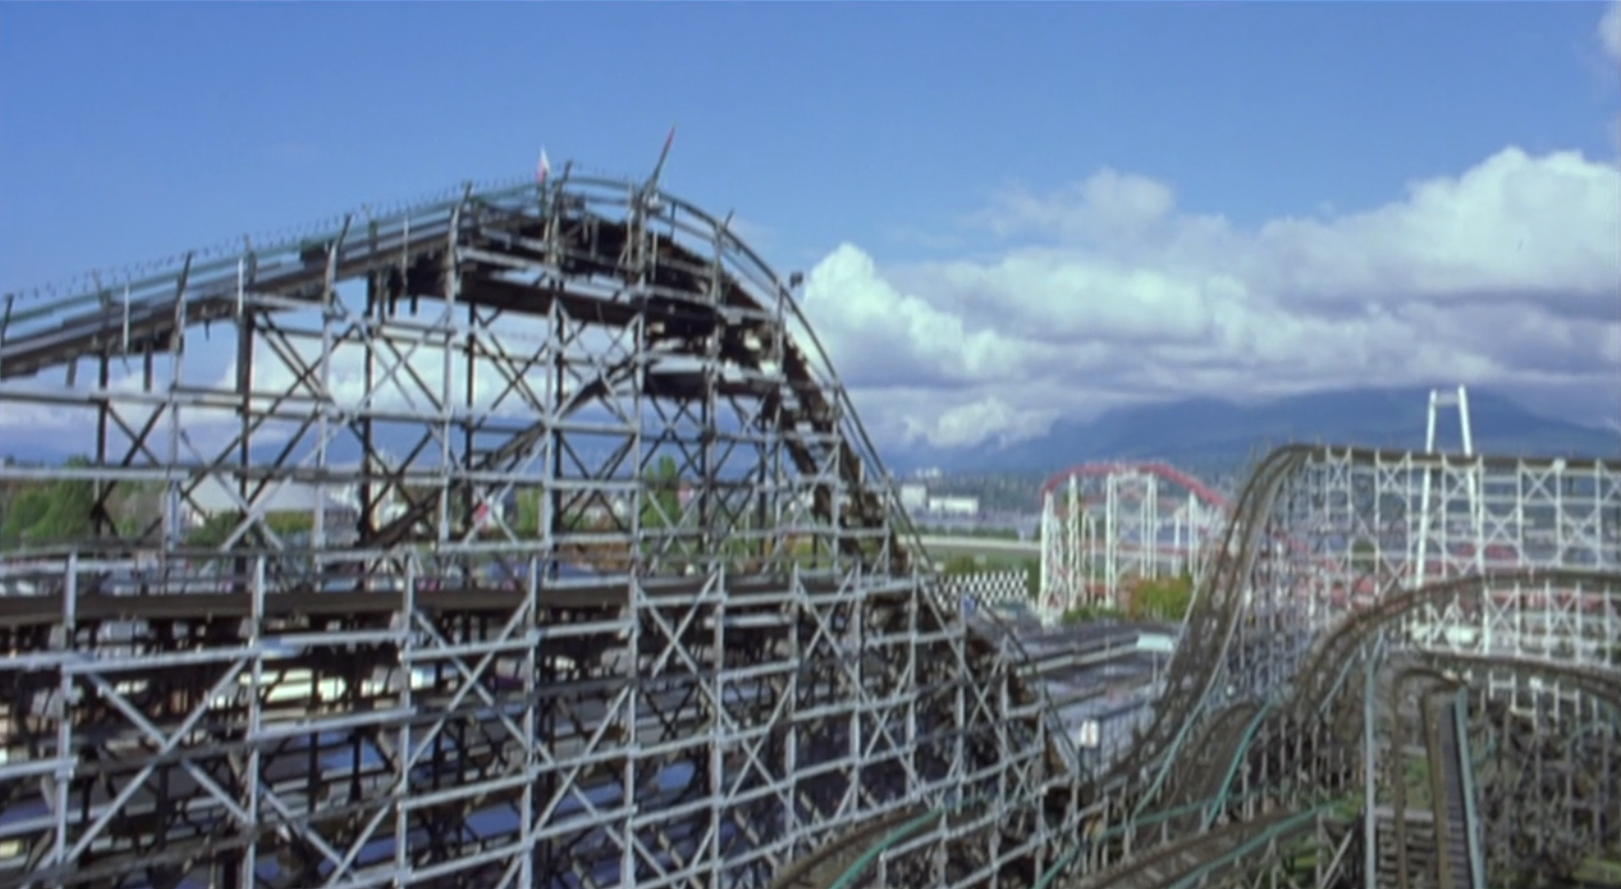 Wooden Roller Coaster's turn around from somewhere on the track